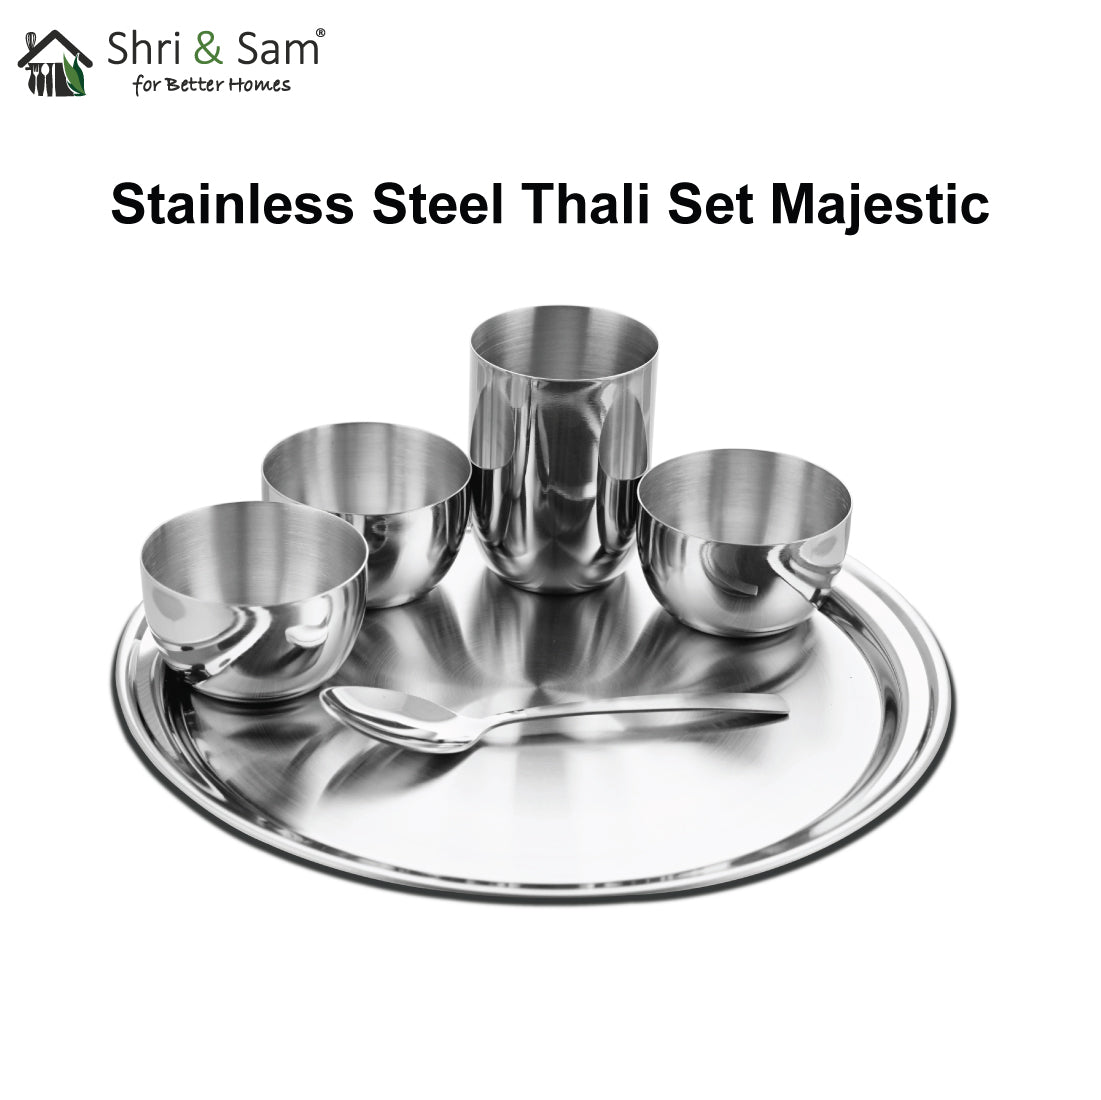 Stainless Steel Thali Set Majestic